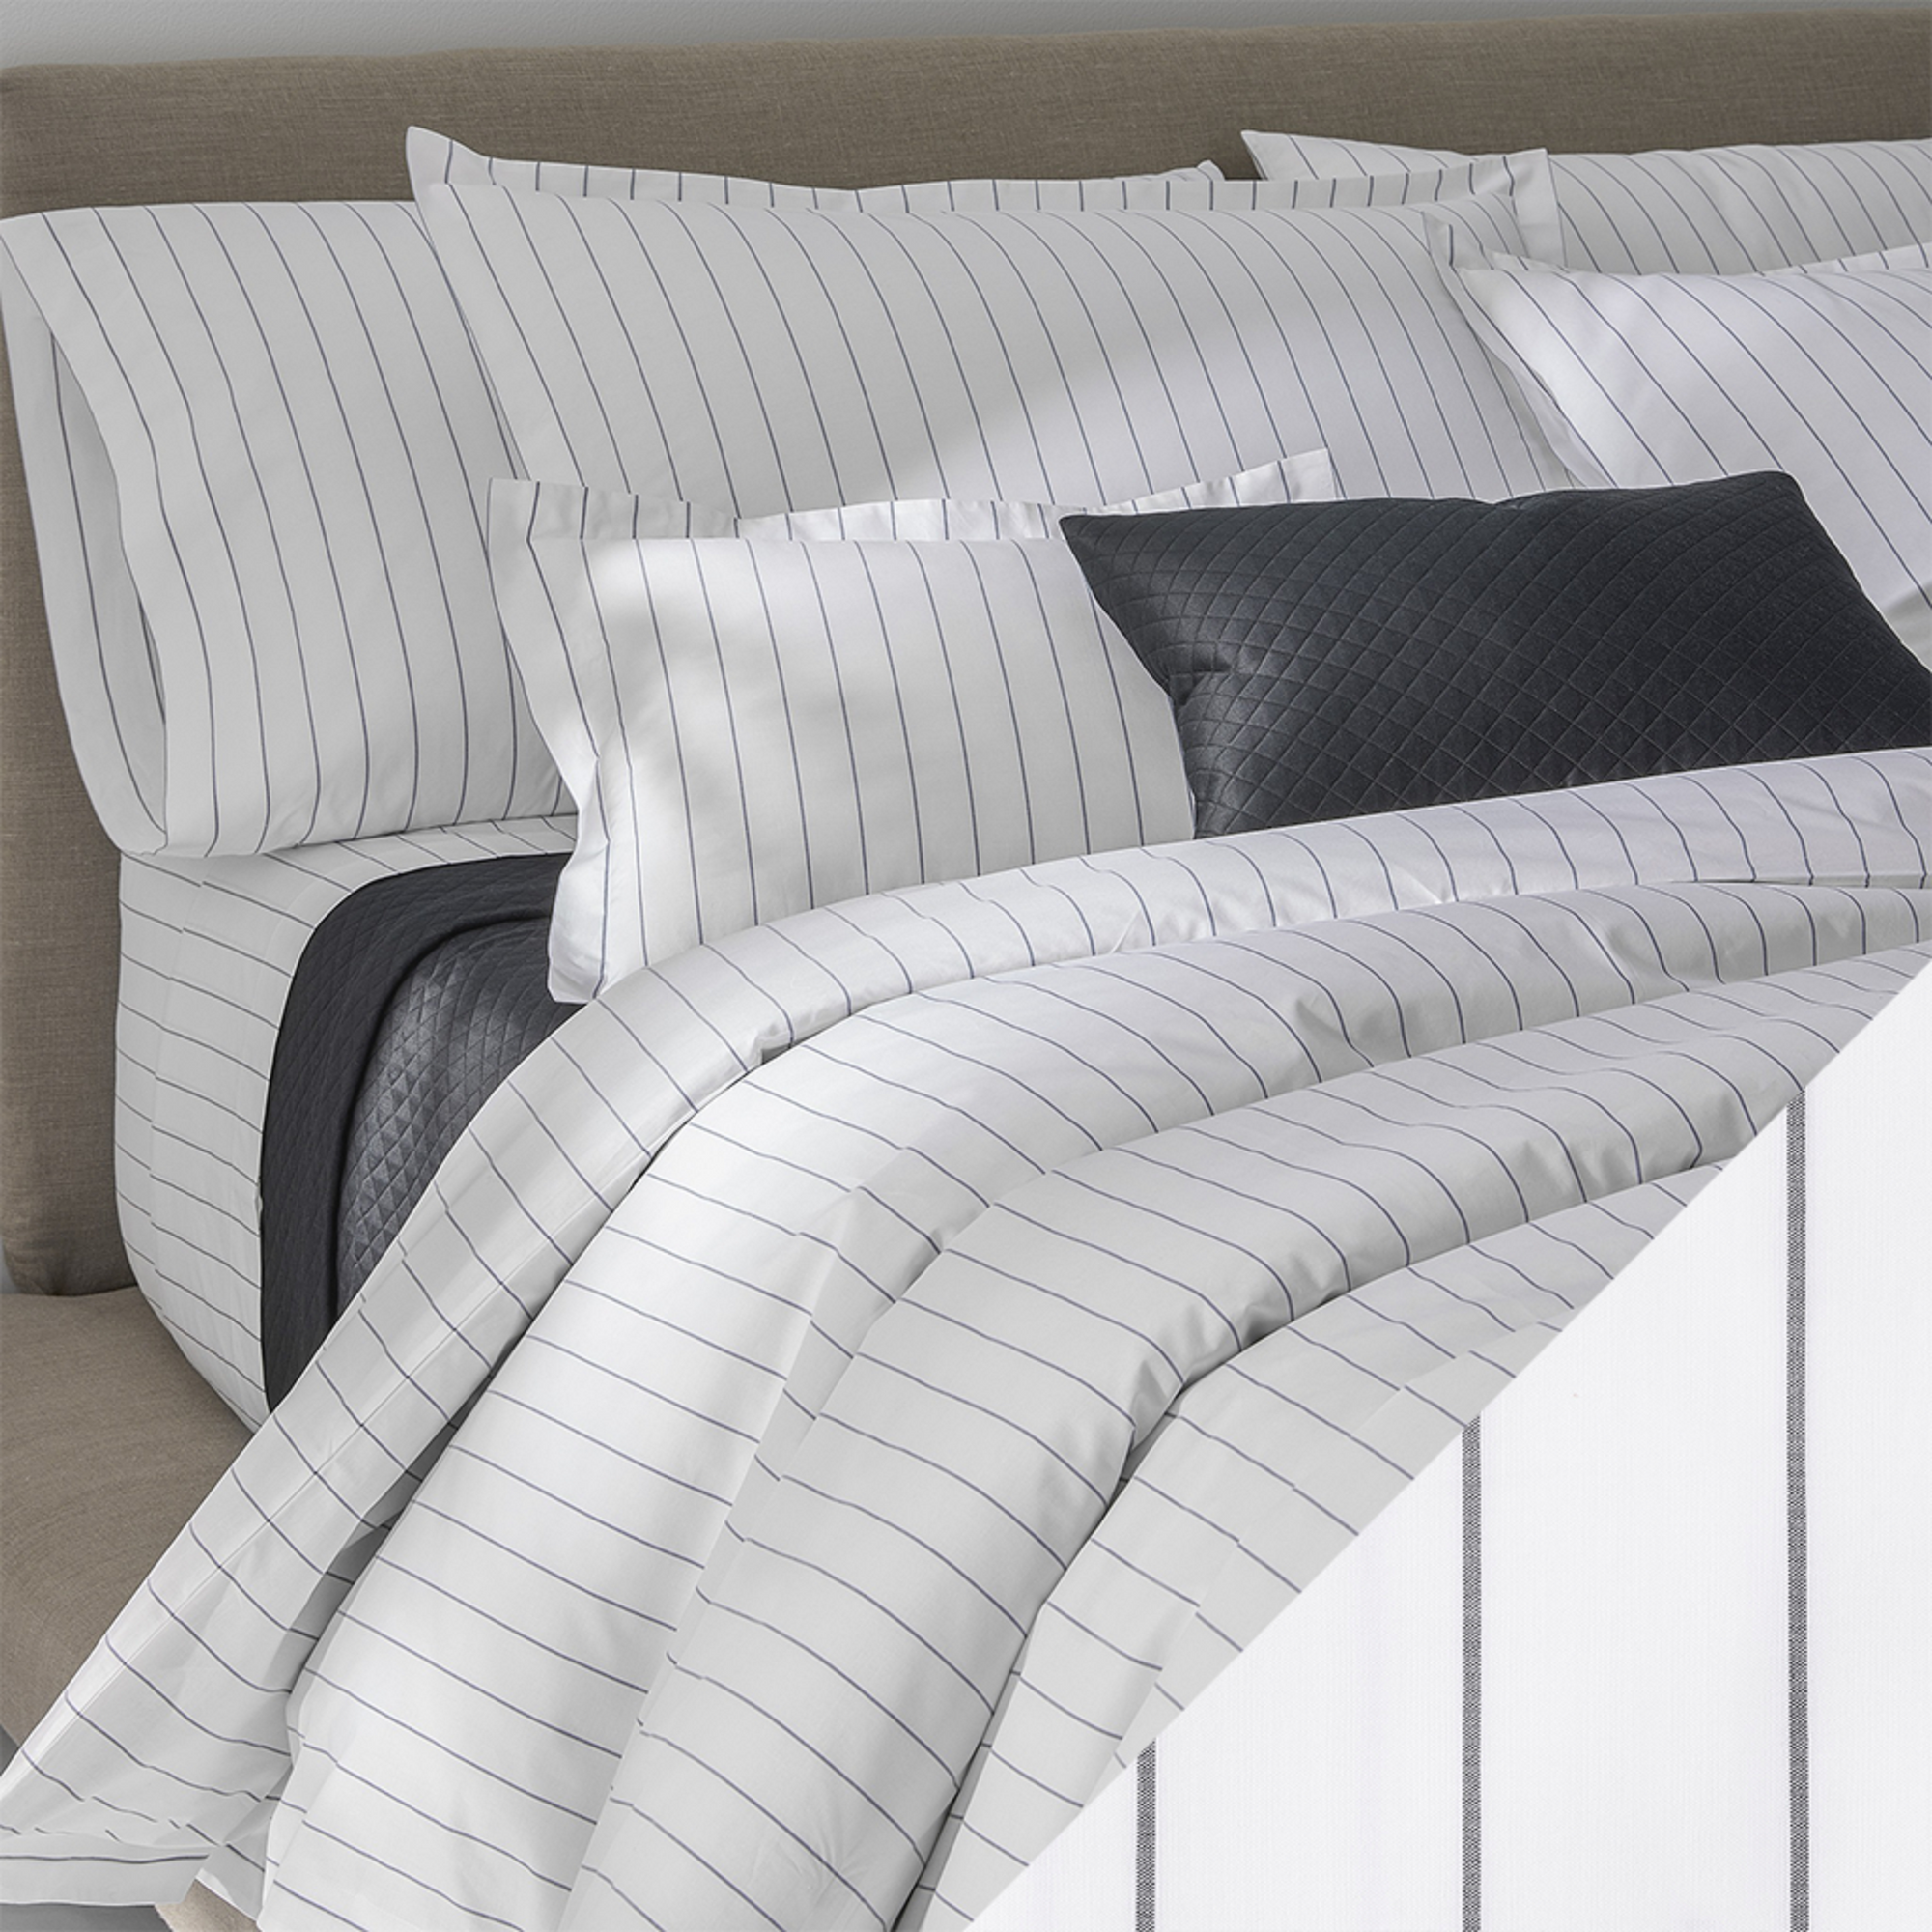 Side View of Matouk Amalfi Bedding with Charcoal Swatch Color